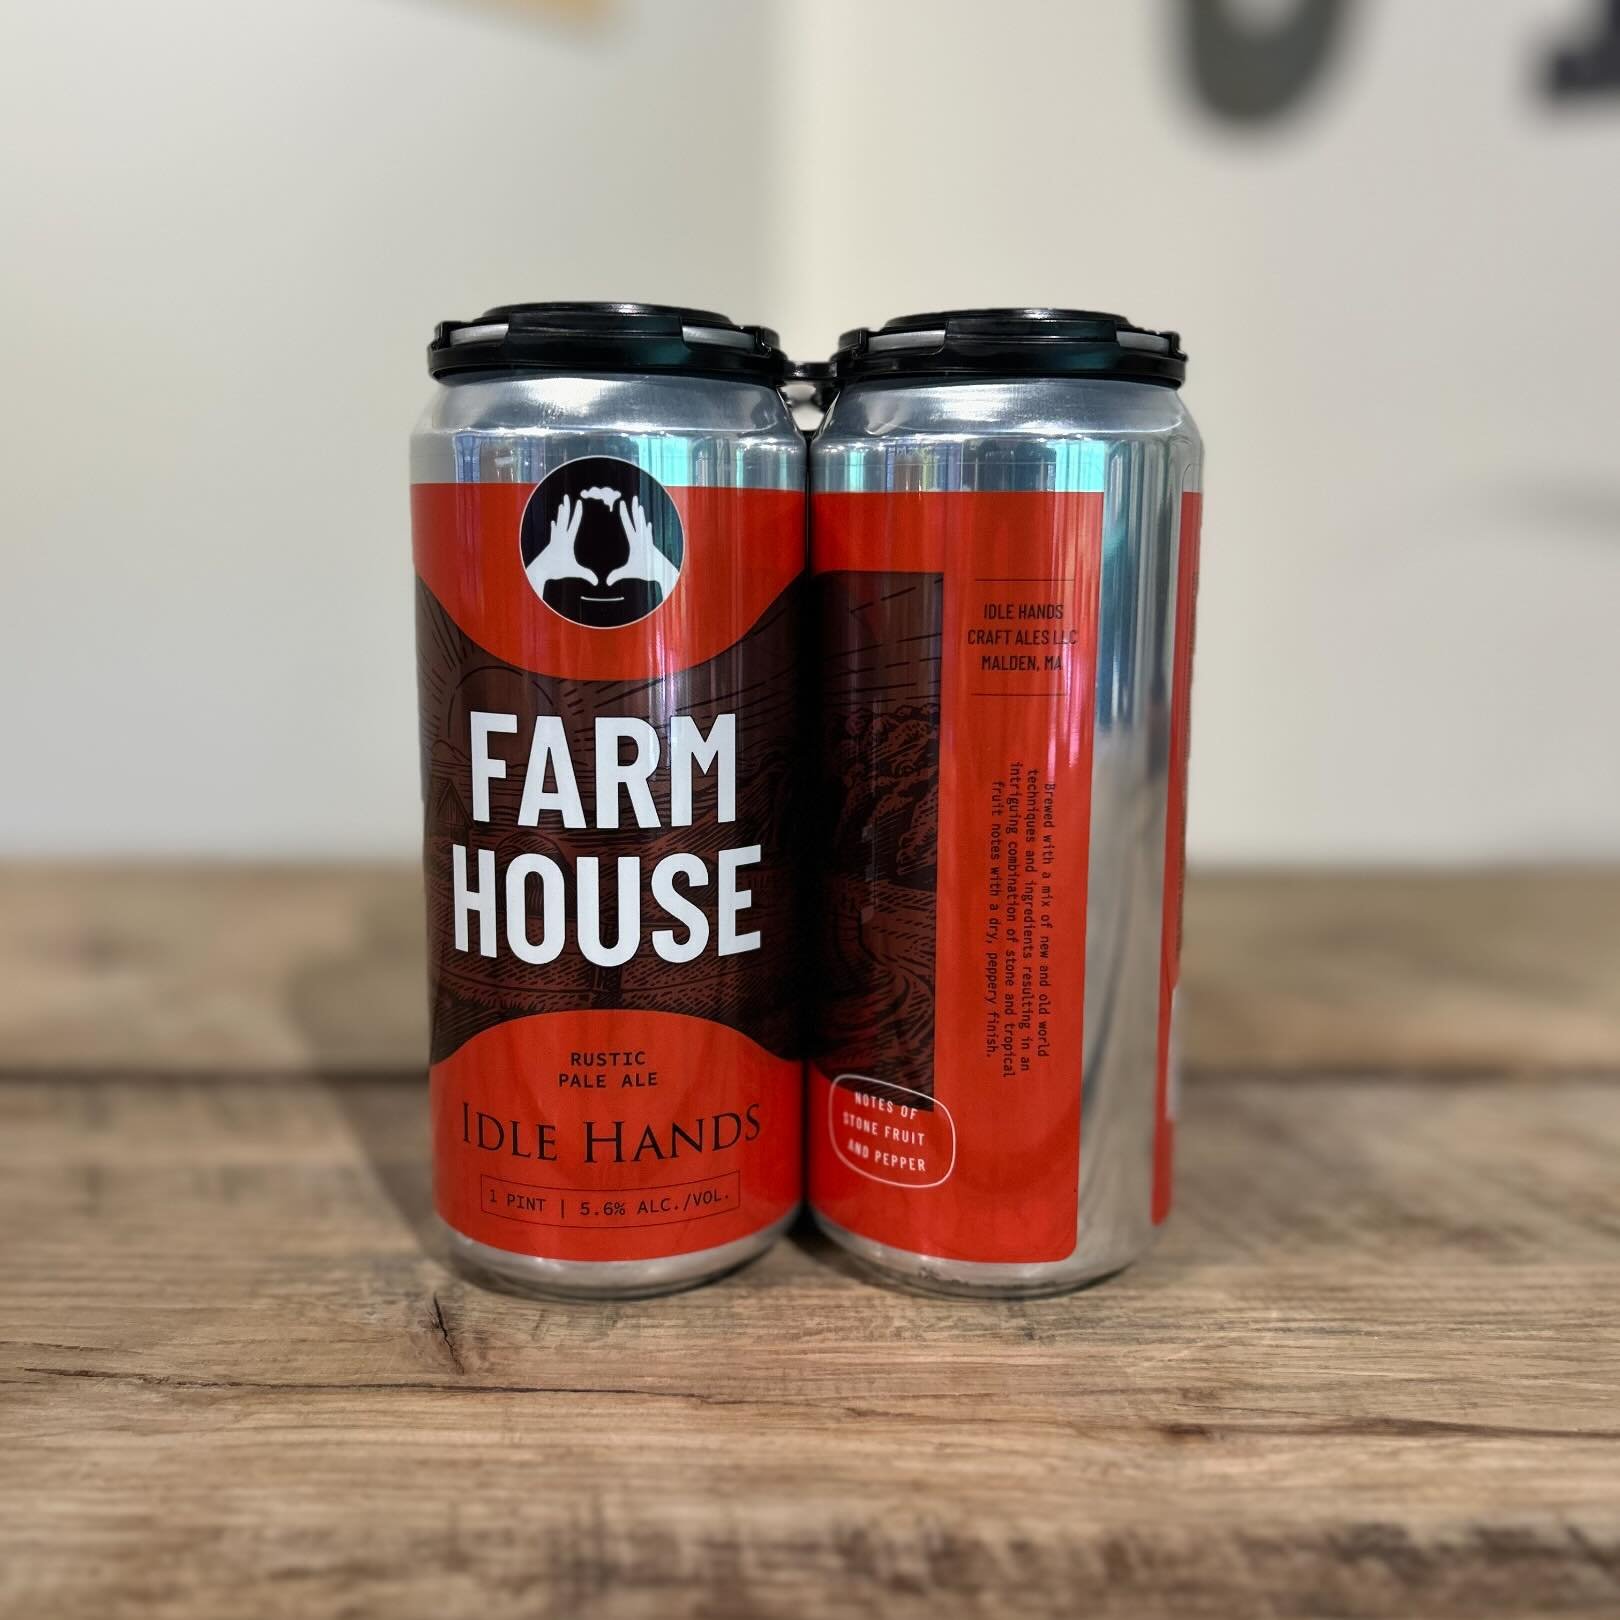 @idlehandsbeer is back in the shop this week #NowAvailable #SudburyCraftBeer #DrinkLocal
&mdash;
American Farmhouse Ale (5.6%) - Easy drinking farmhouse ale with an American twist. Notes of stone fruit, tropical fruit and bubblegum with a dry peppery